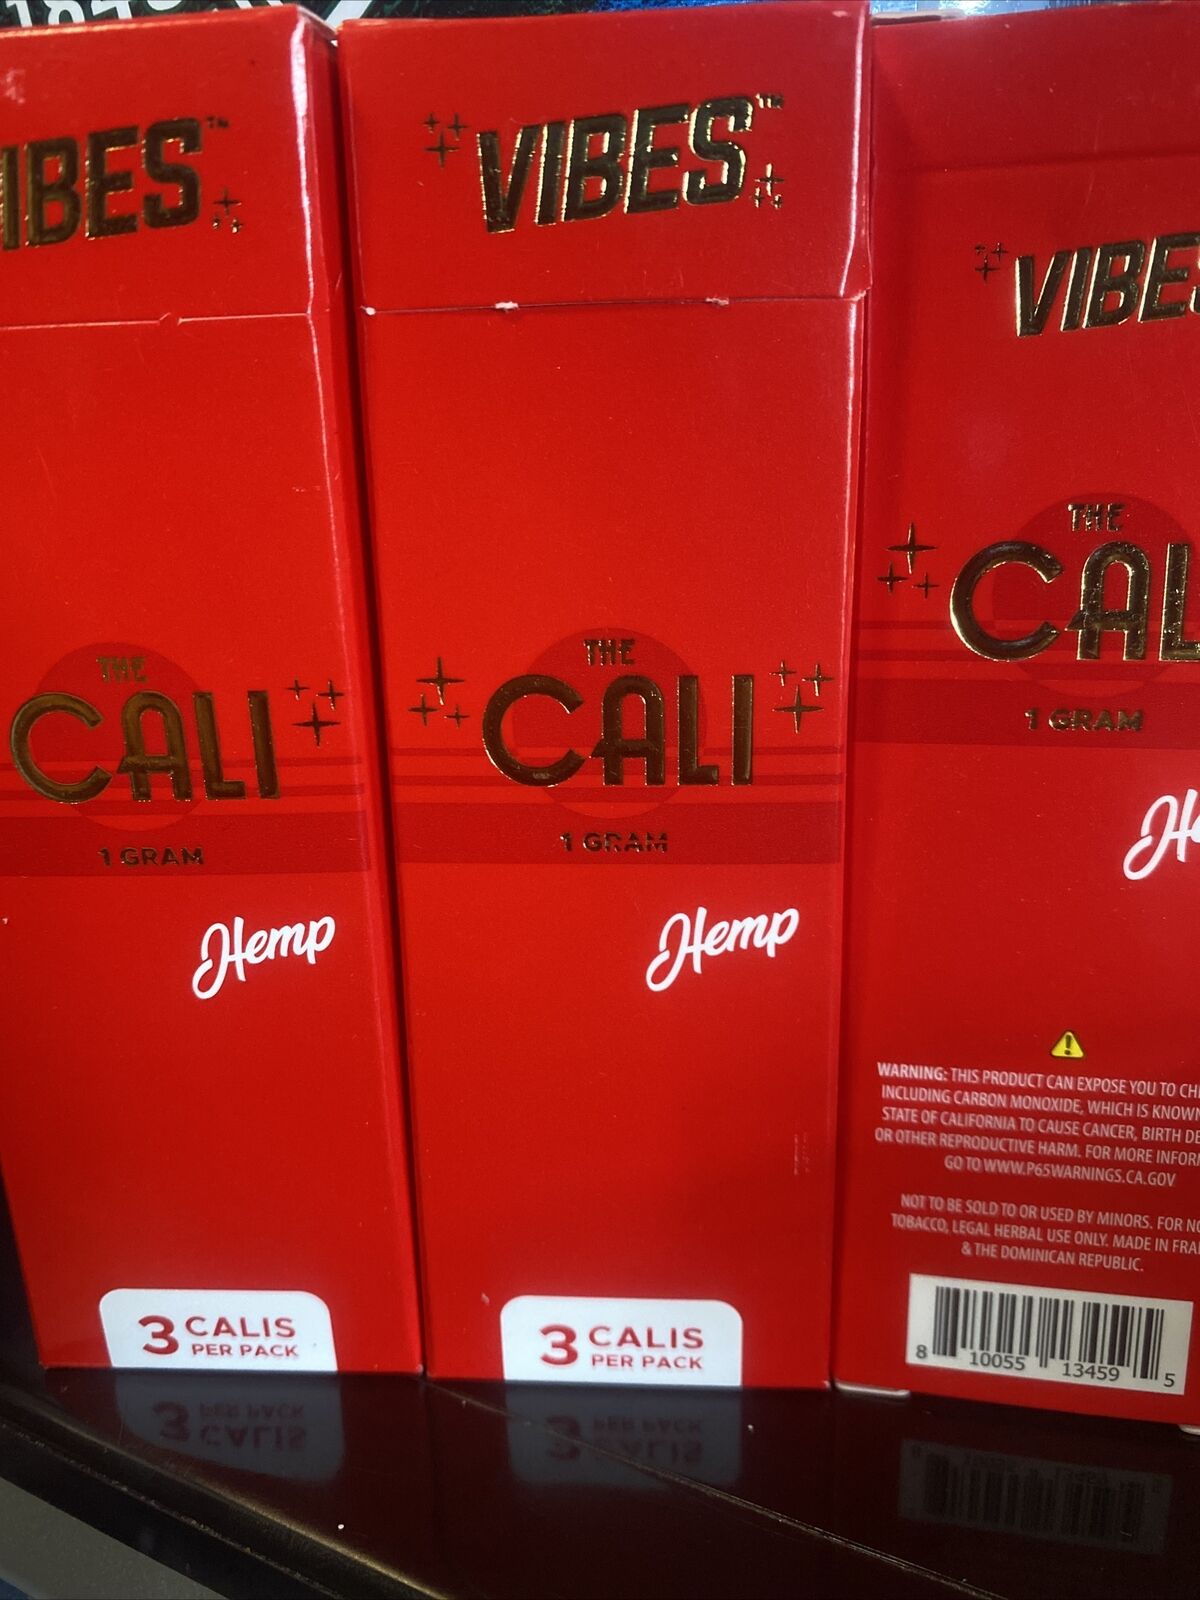 THE CALI BY VIBES™ 1 GRAM CALI 3 Pack